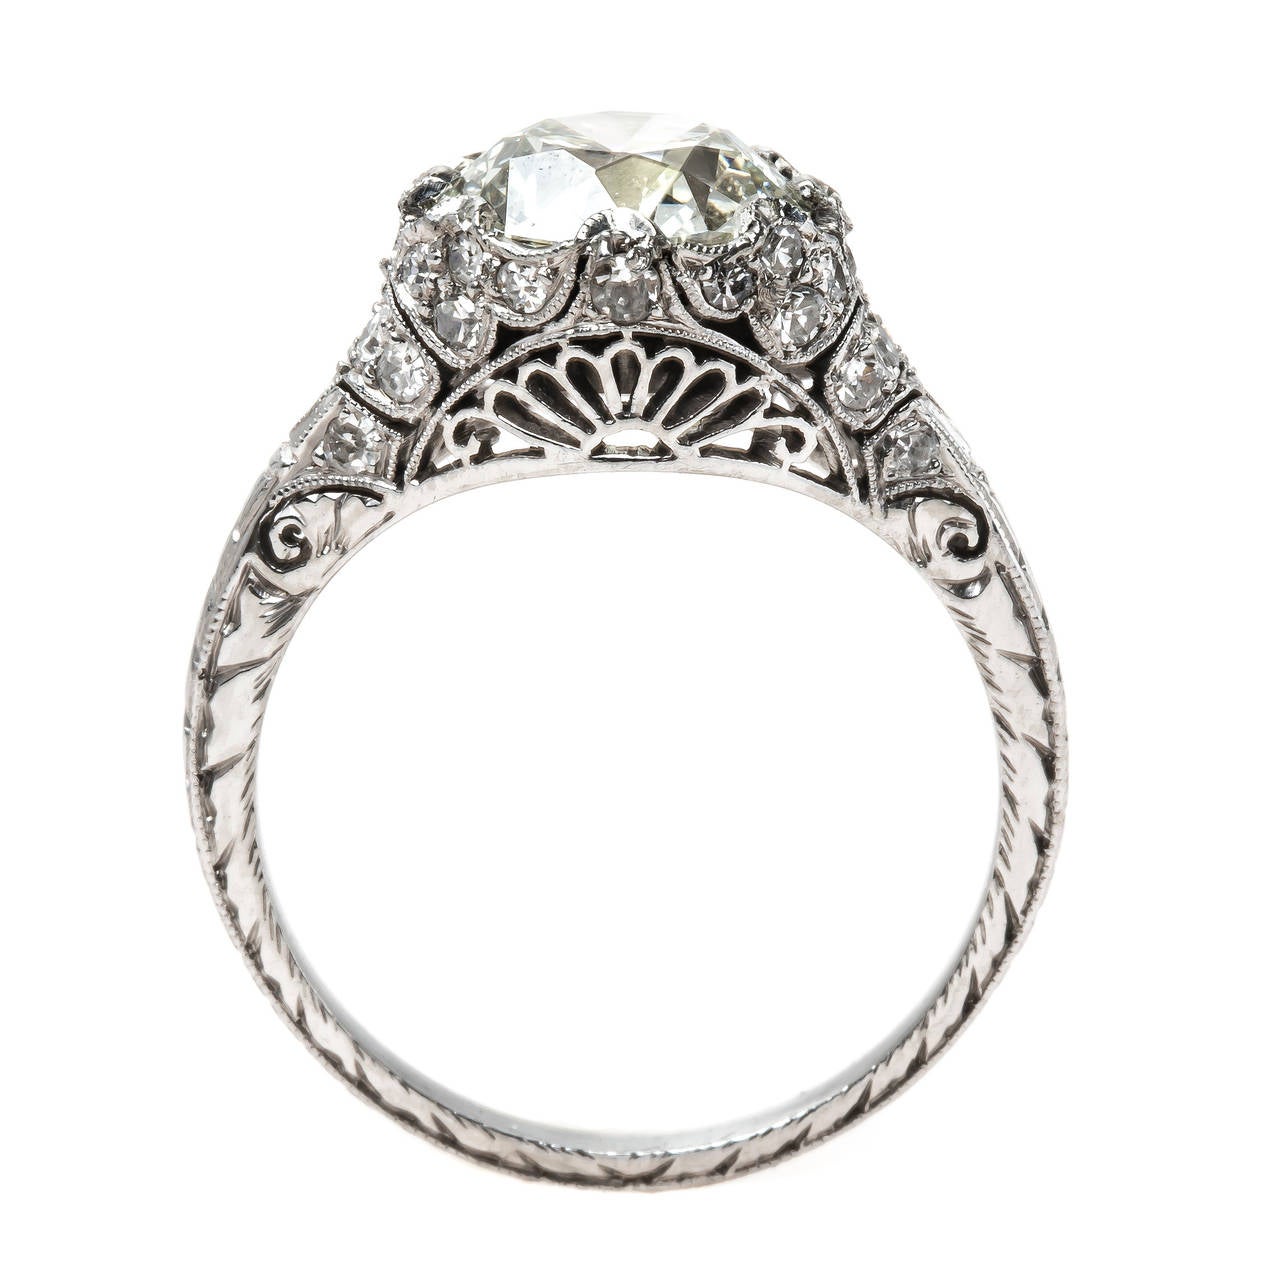 Carlton is an over-the-top authentic Edwardian era (circa 1910) platinum ring centering a stunning 2.77ct EGL certified Transitional Brilliant Cut diamond graded K color and VS2 clarity. This one-of-a-kind ring is further adorned with thirty-two